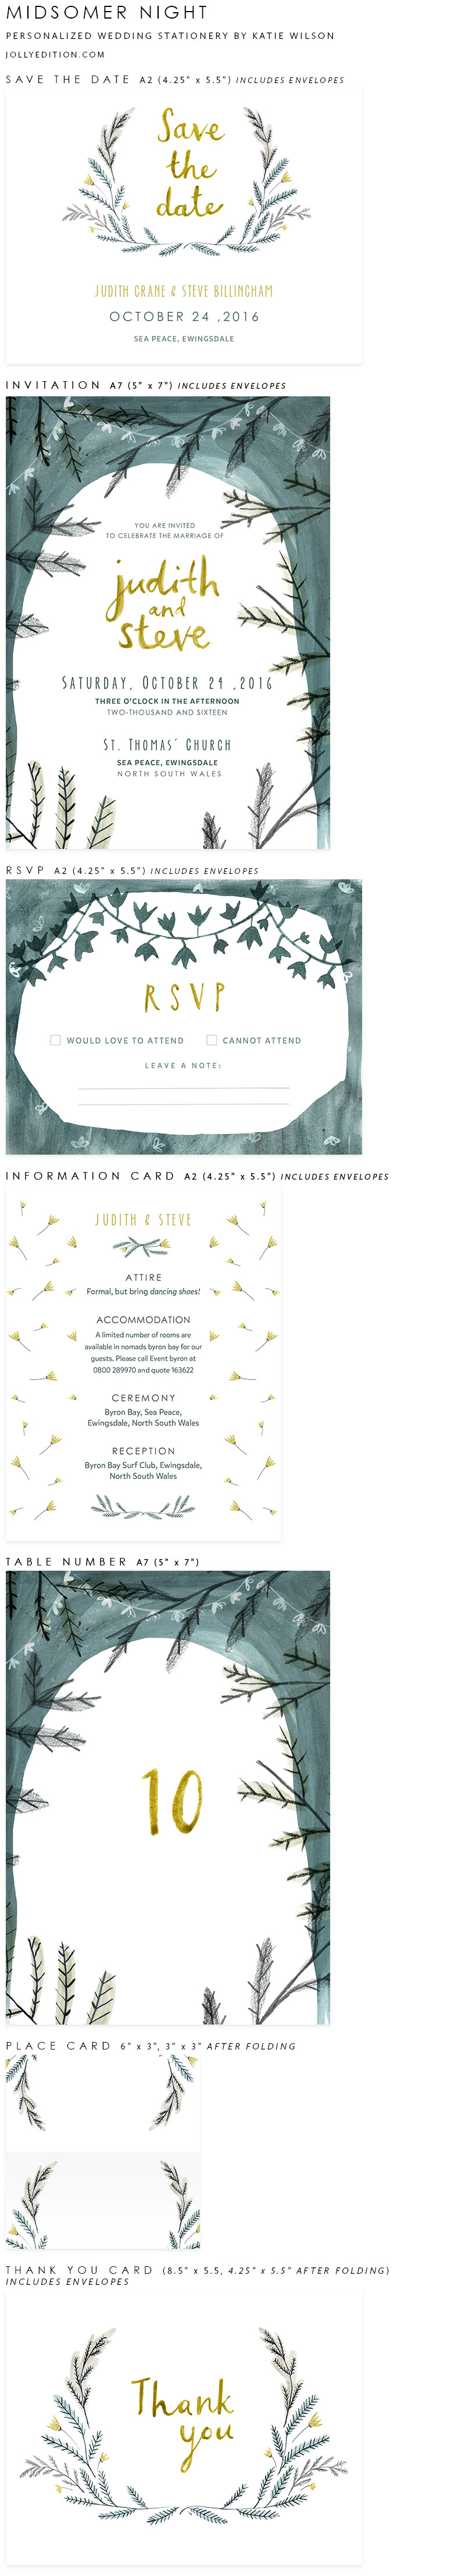 Midsomer Night Personalized Wedding Stationery by Katie Wilson of Jolly Edition